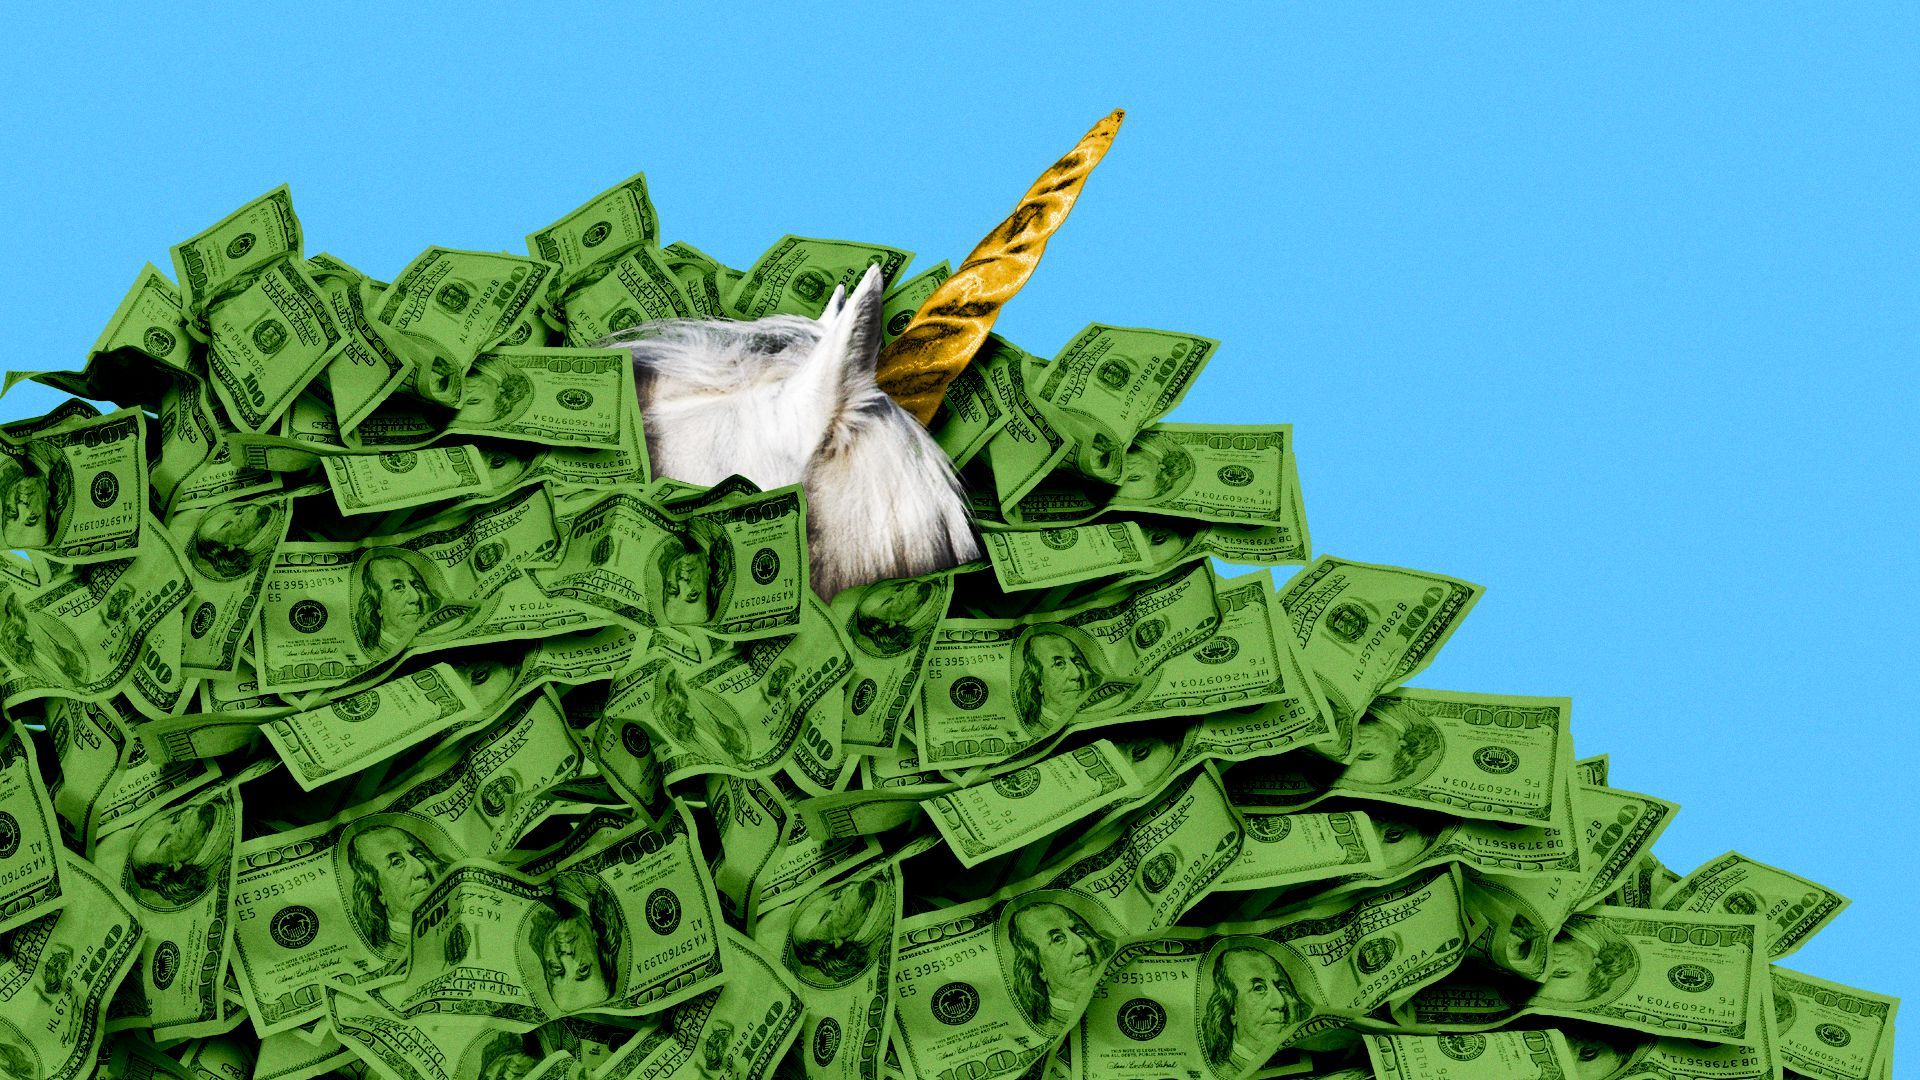 Illustration of a unicorn horn sticking out of a pile of cash.